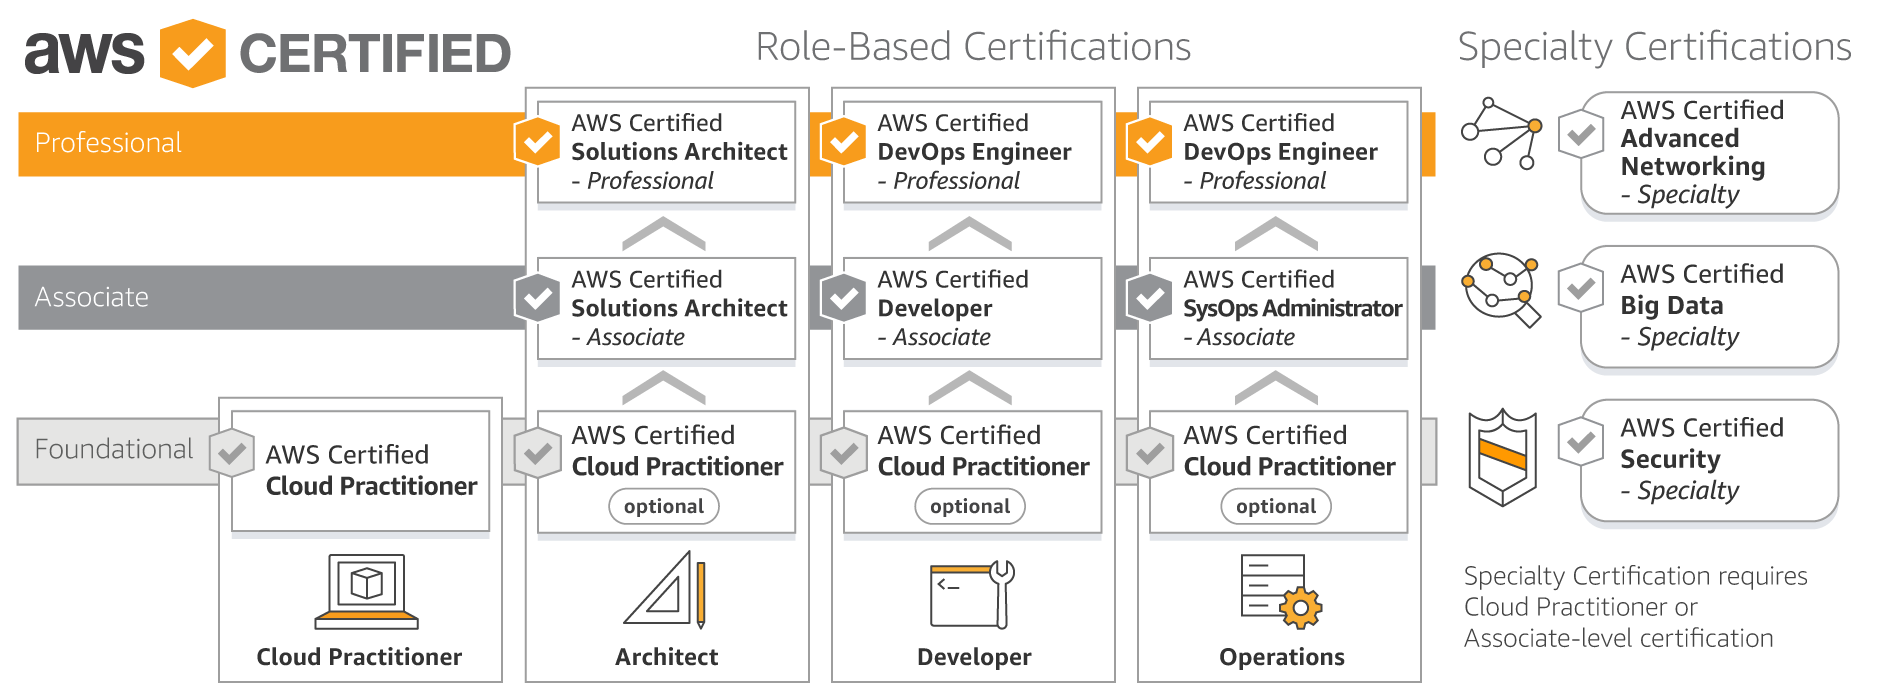 AWS_Certification